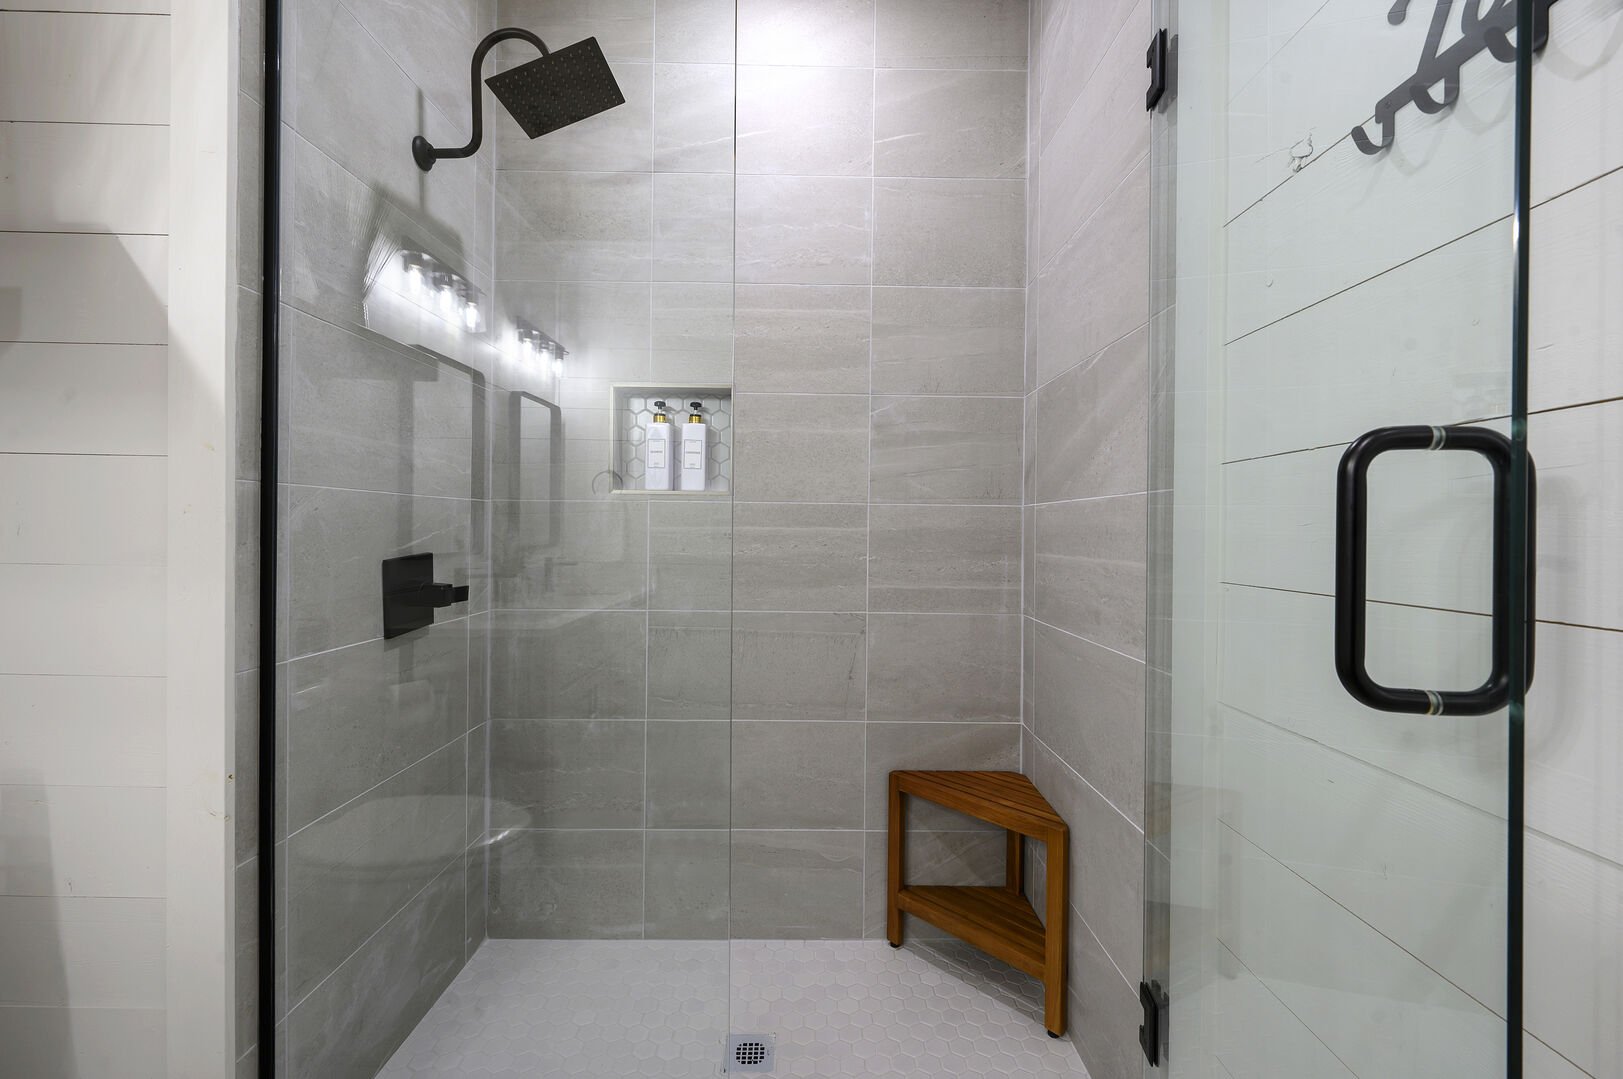 Full stand up shower in upstairs bath